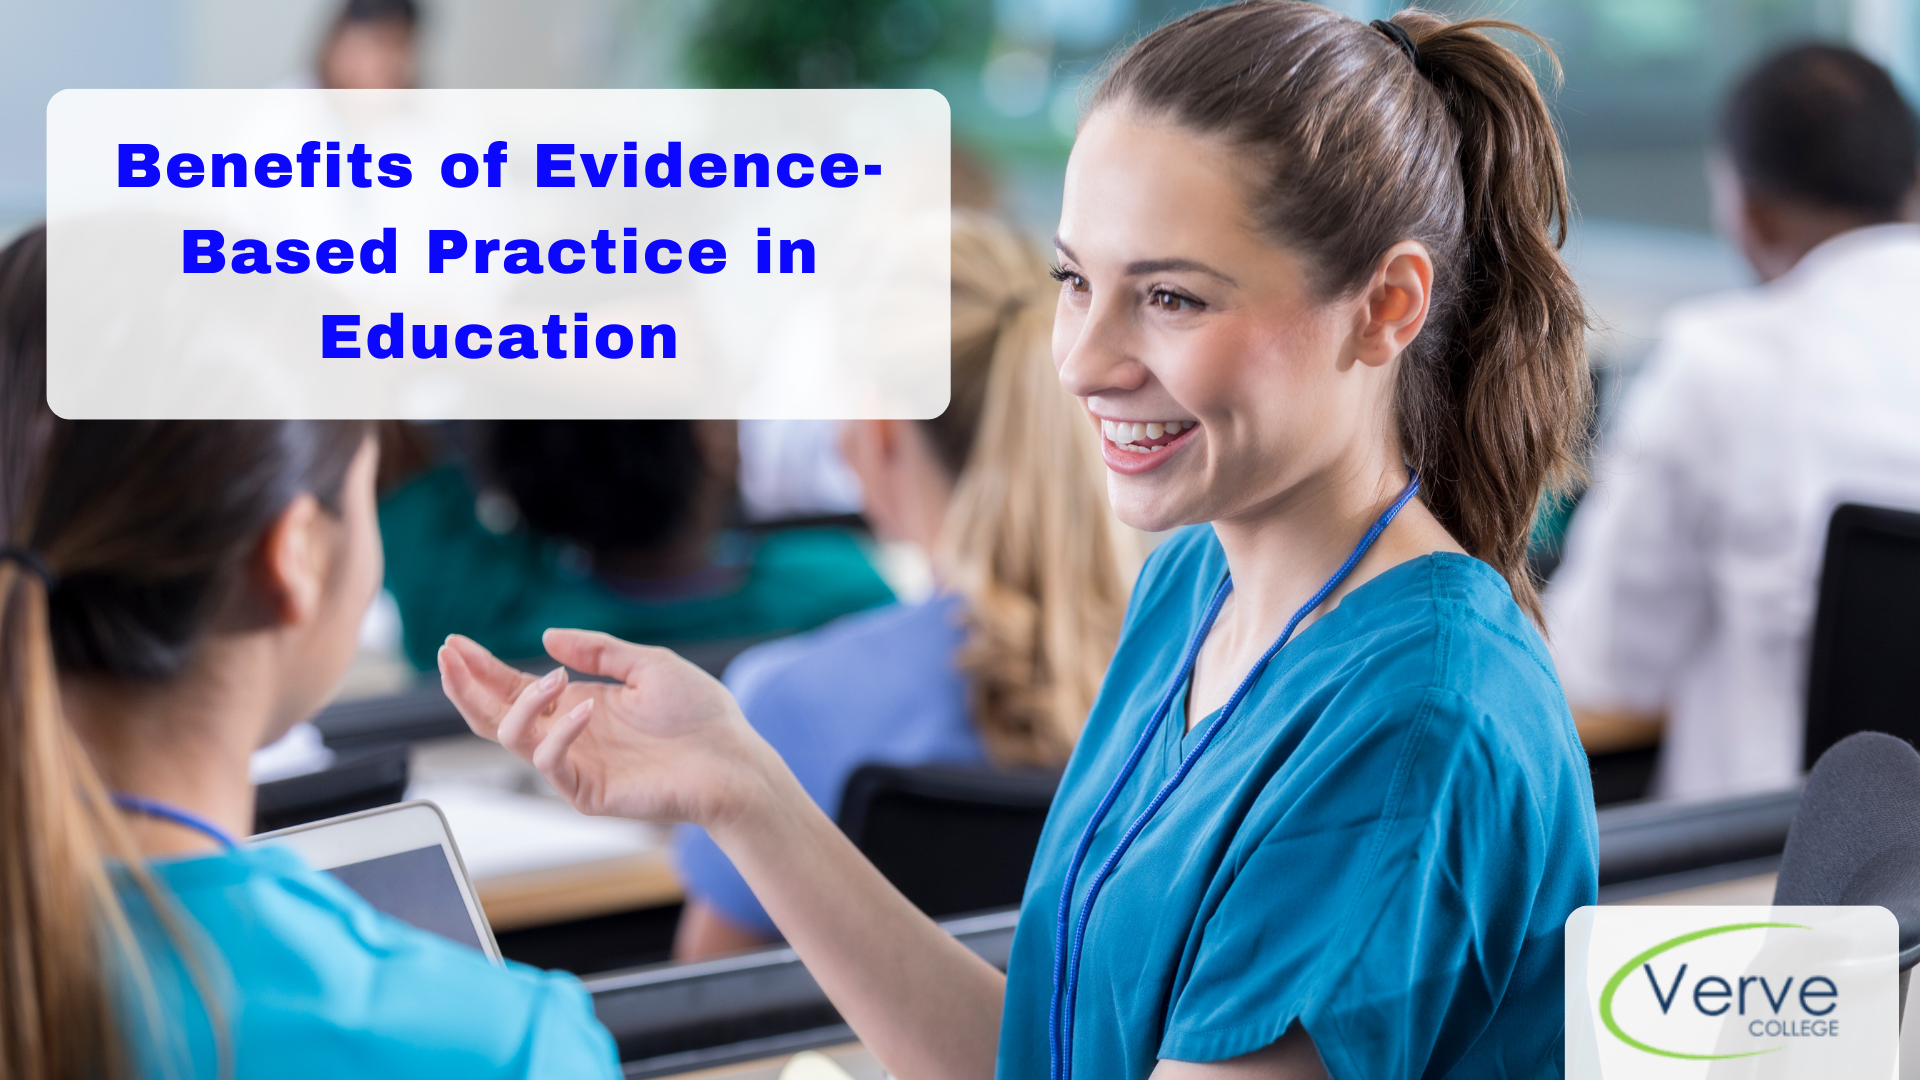 What are the Benefits of Evidence-Based Practice in Education?